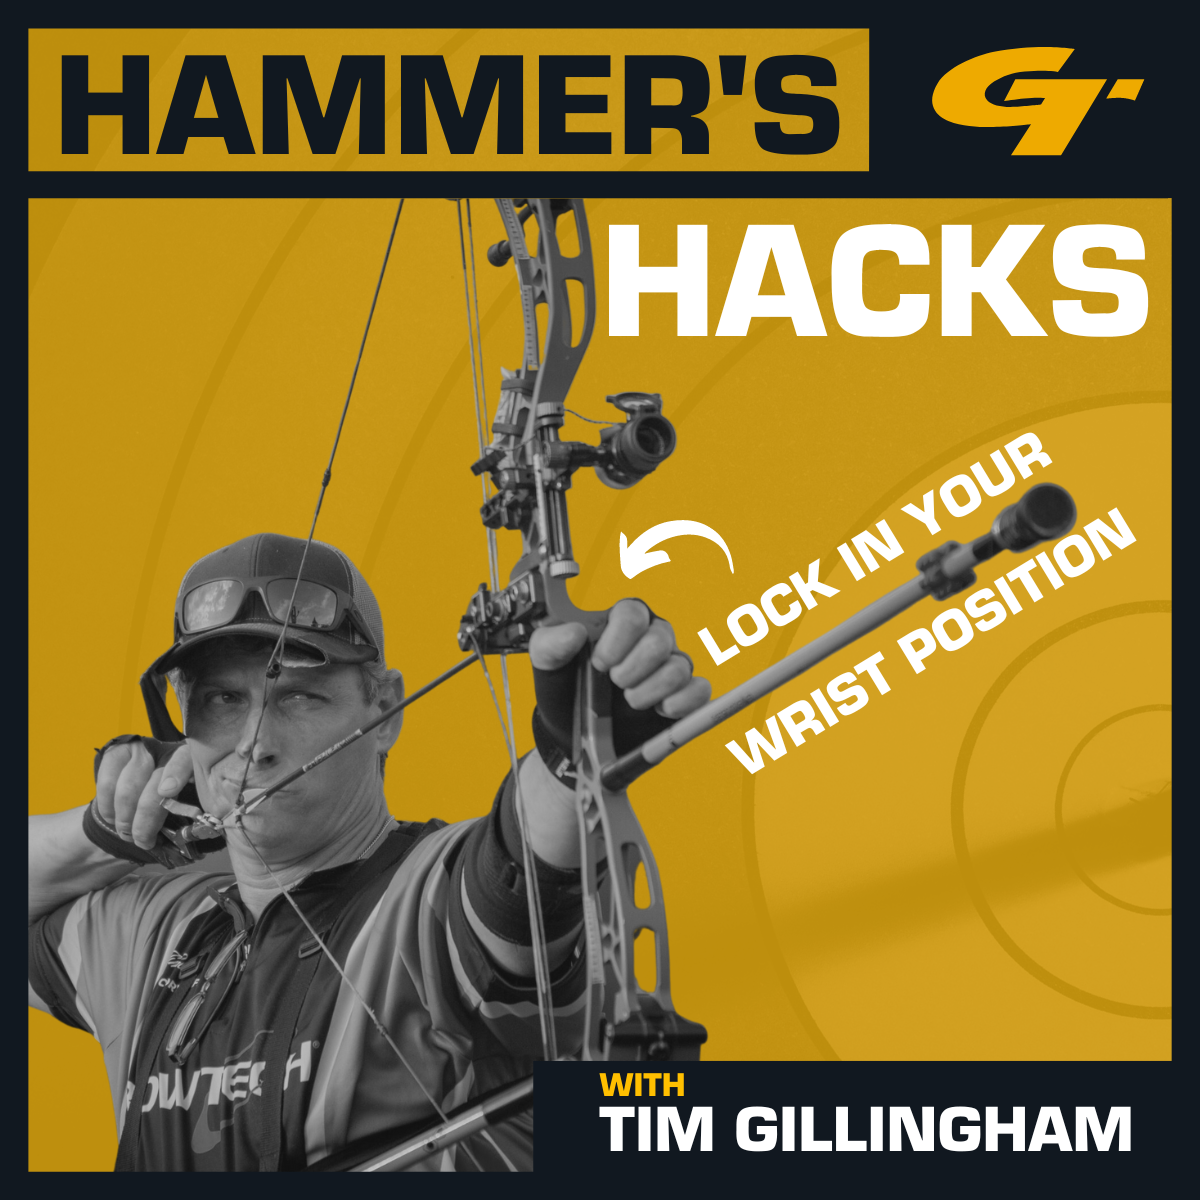 Hammer’s Hack #1 - How to Lock In Your Wrist Position